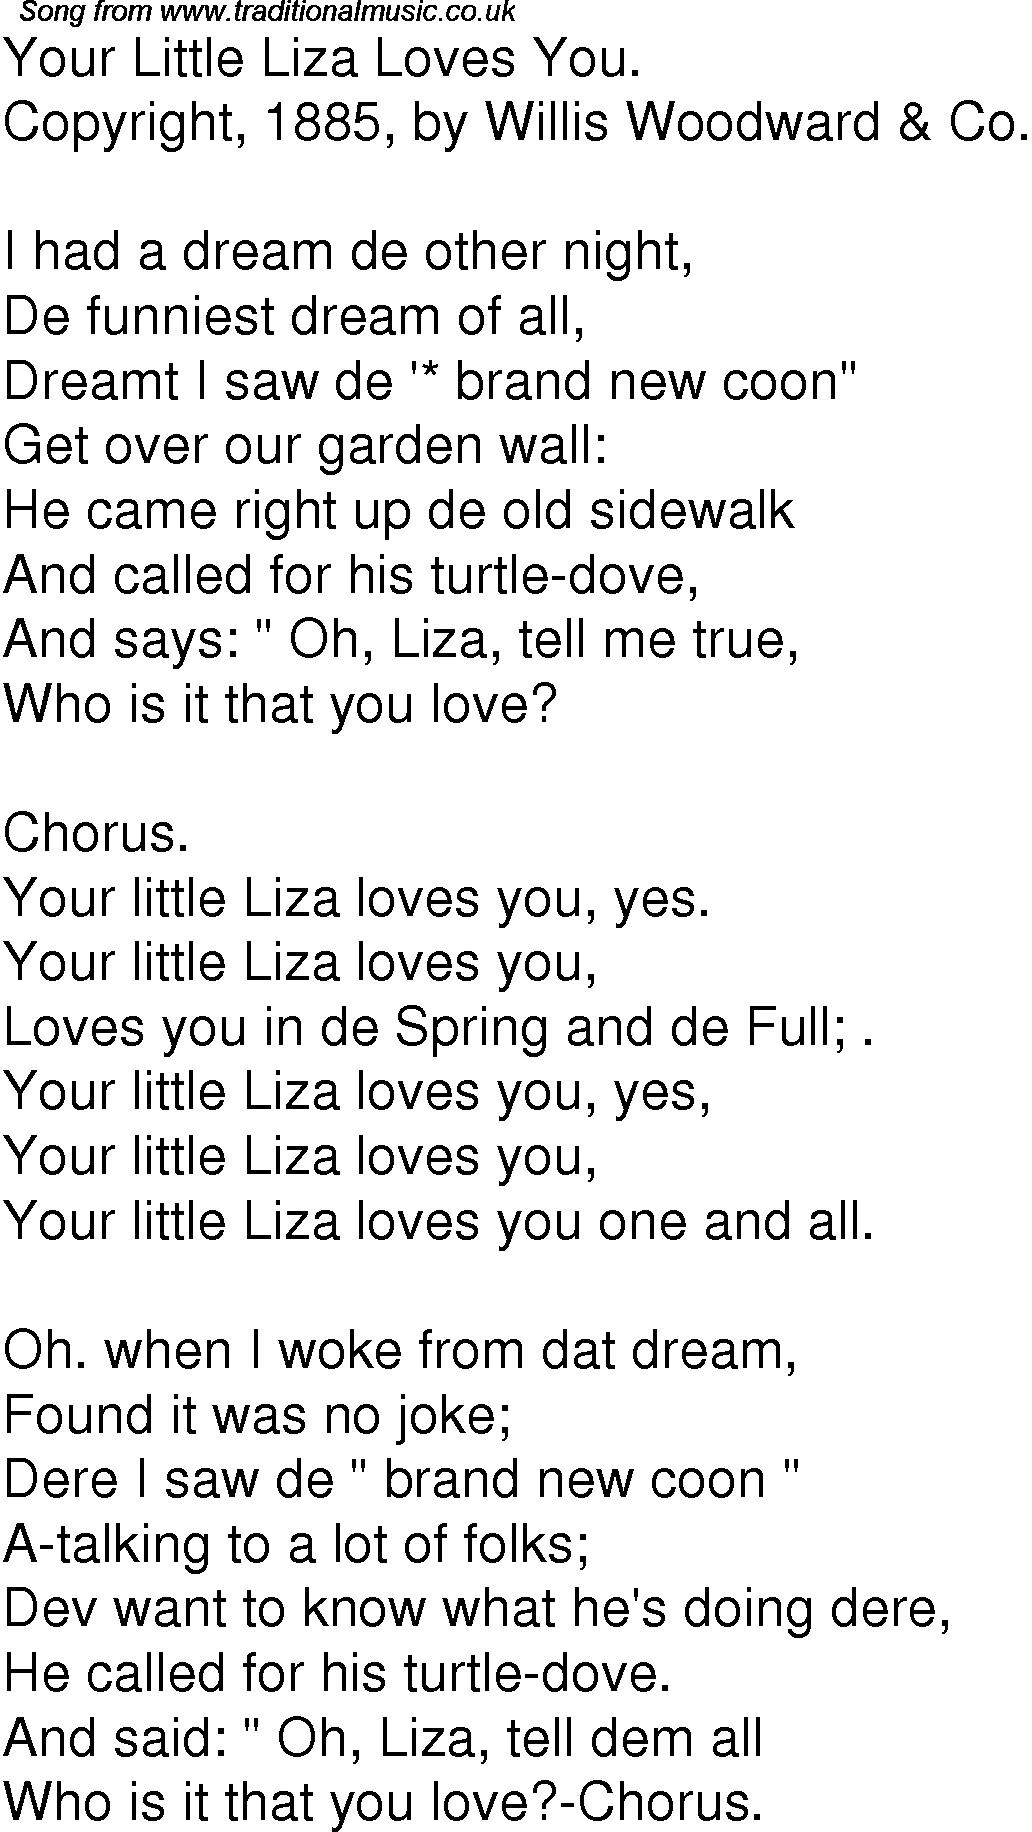 Old Time Song Lyrics For 10 Your Little Liza Loves You